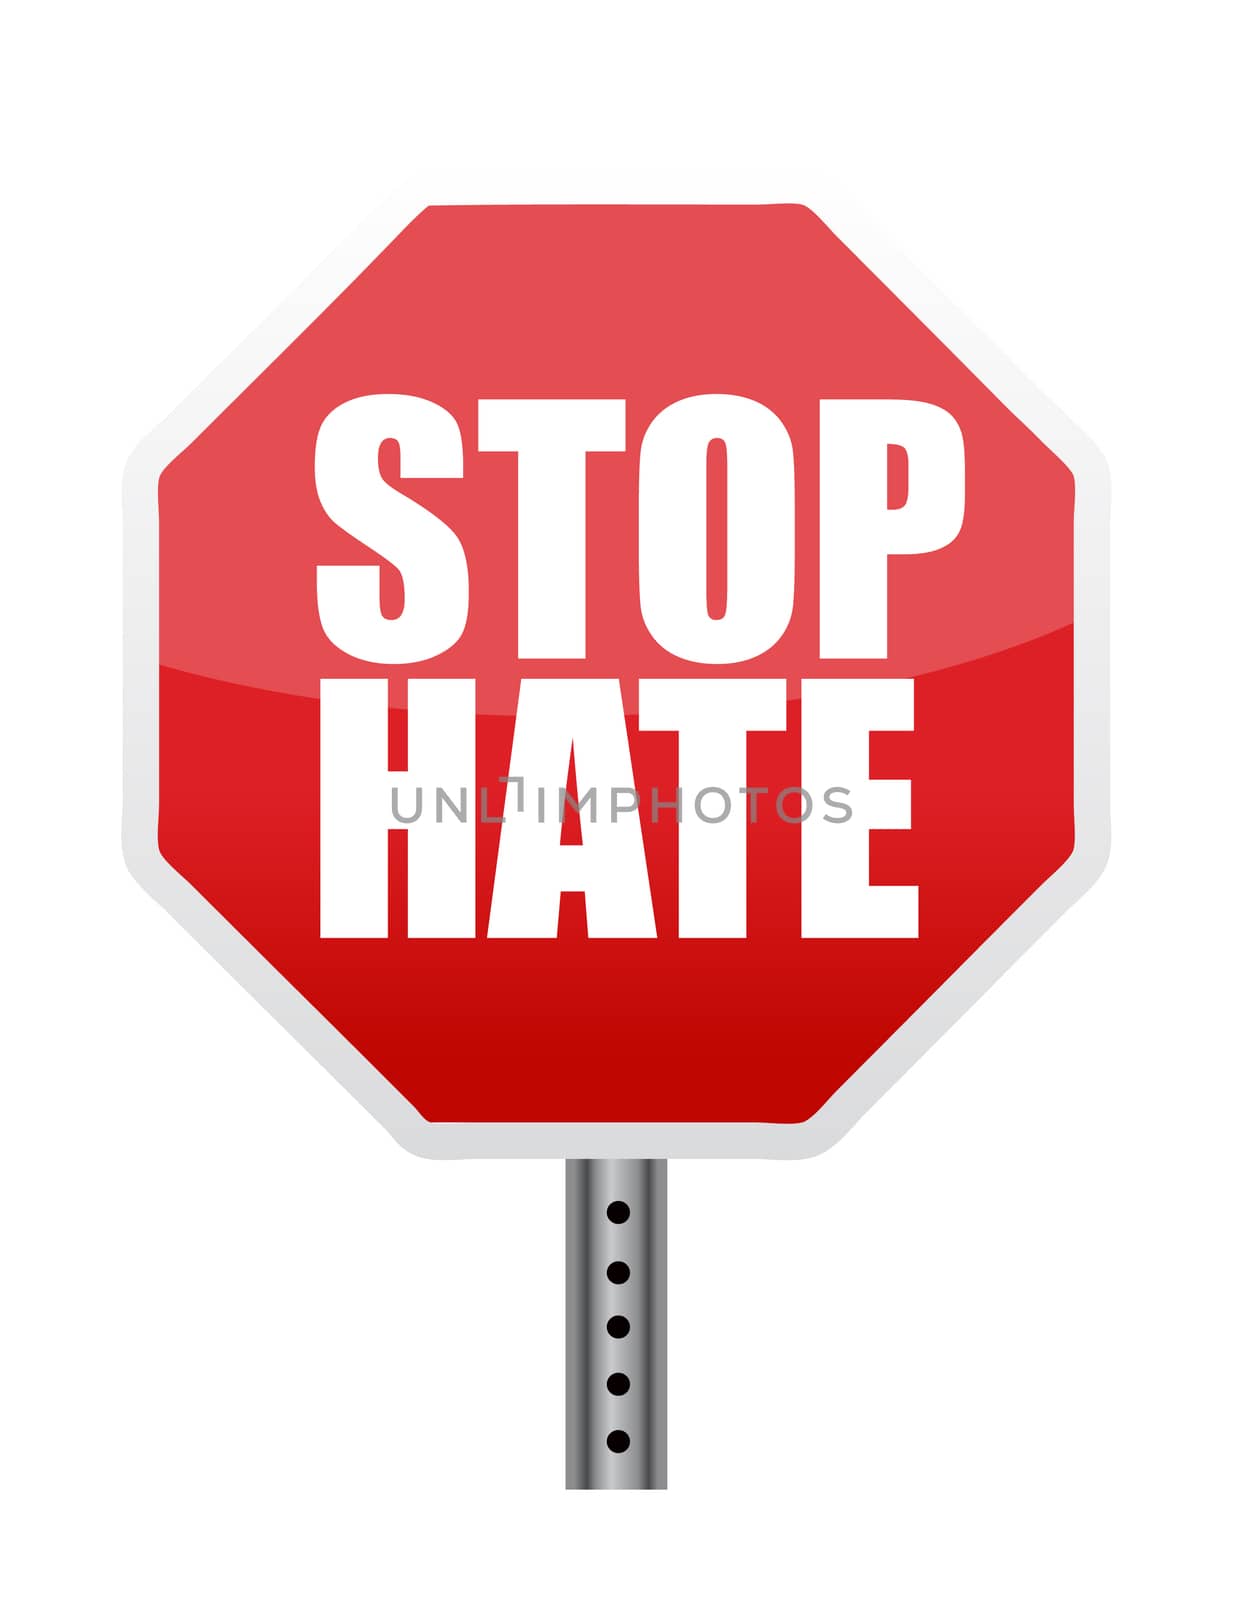 stop sign reading "Stop Hate"